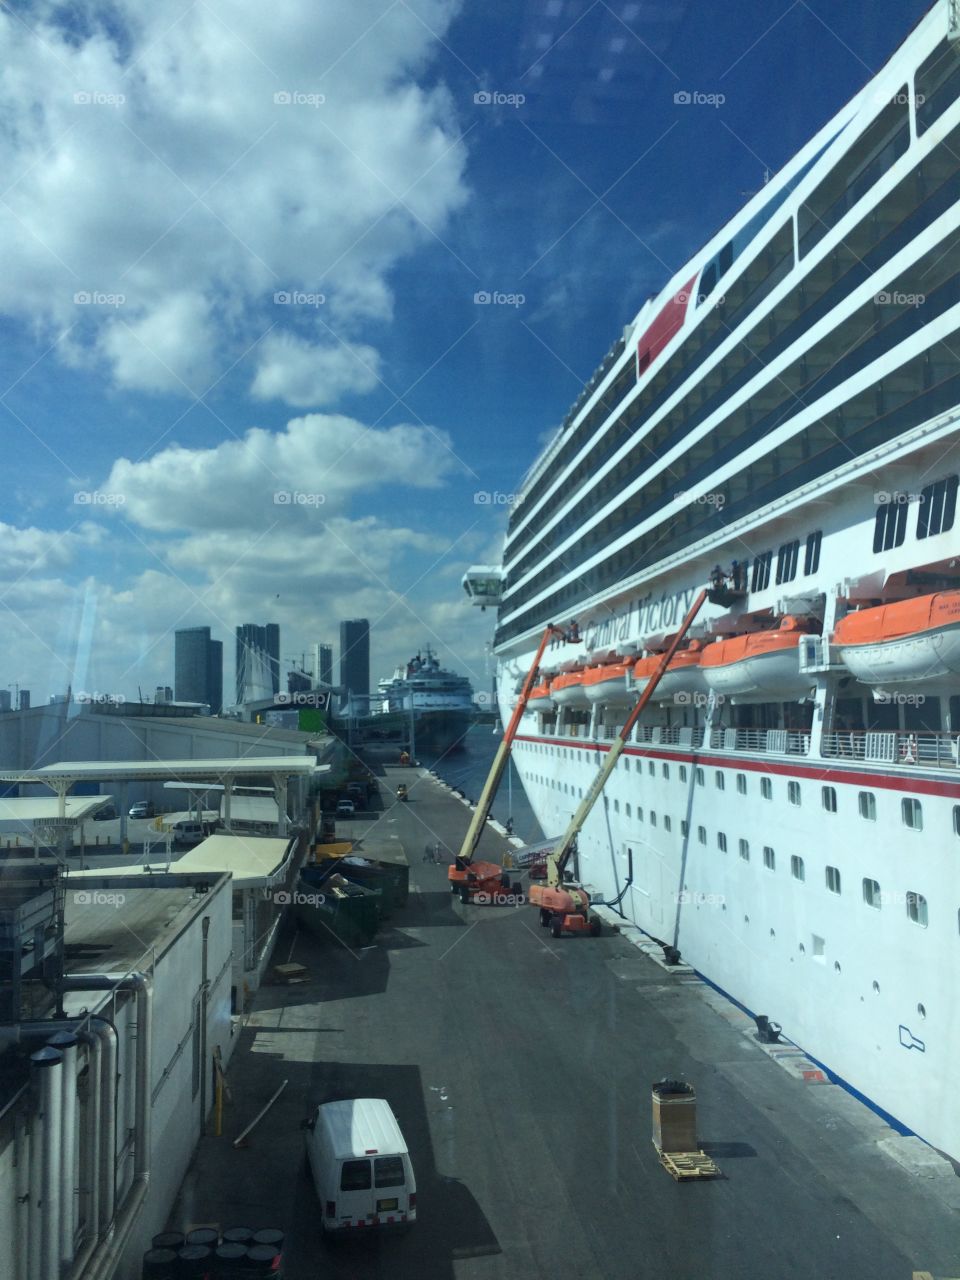 Carnival Victory Cruise ship